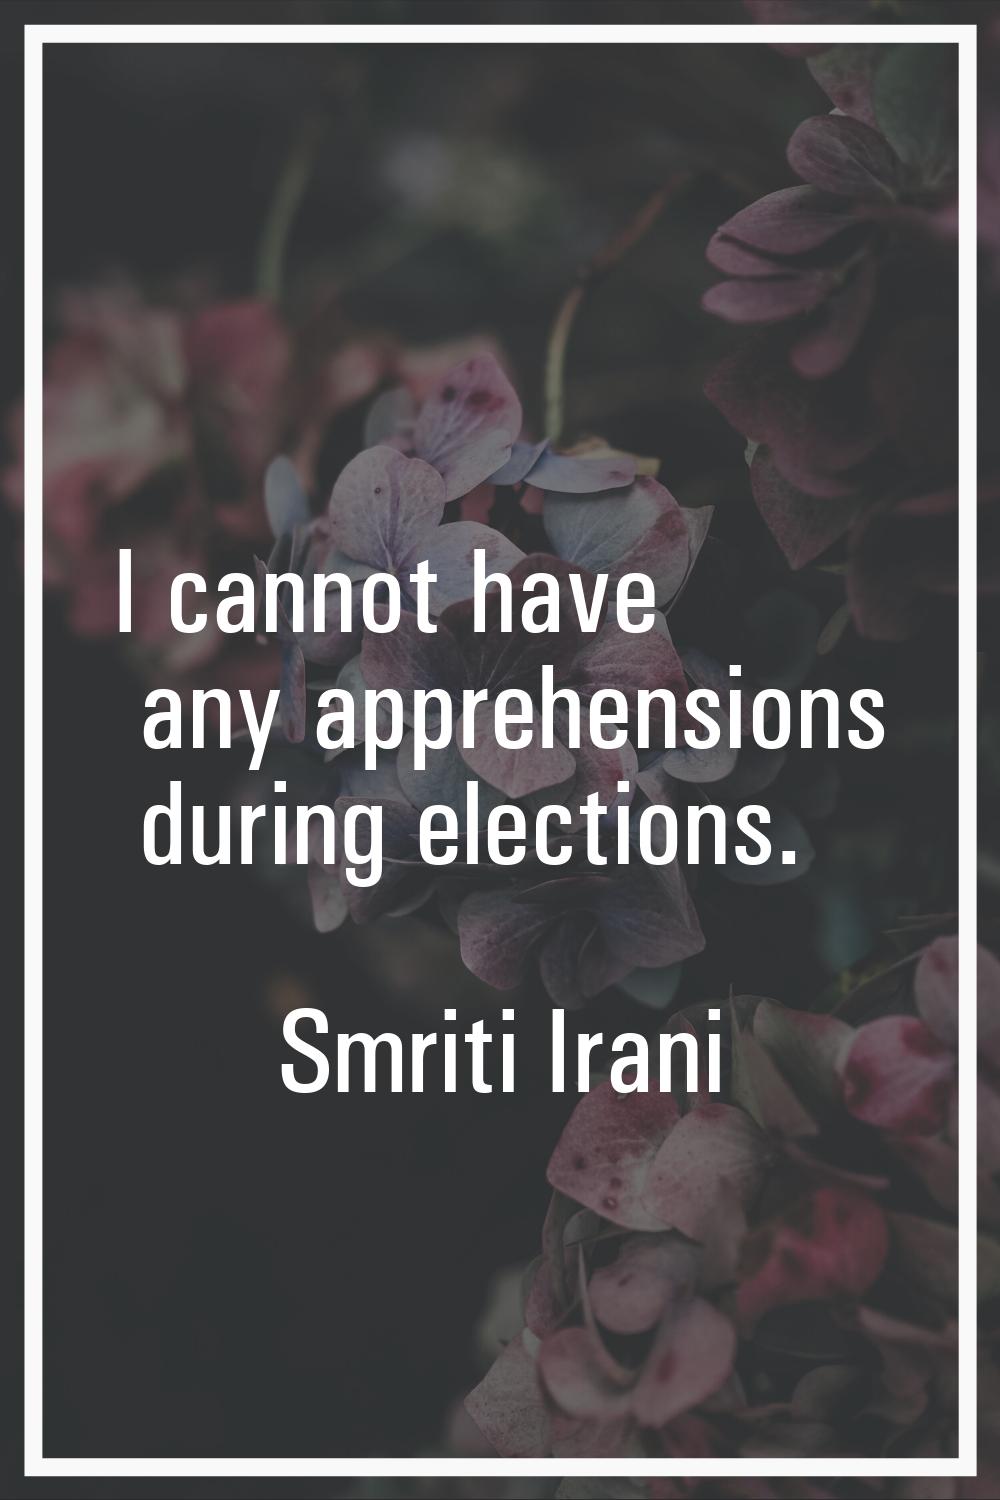 I cannot have any apprehensions during elections.